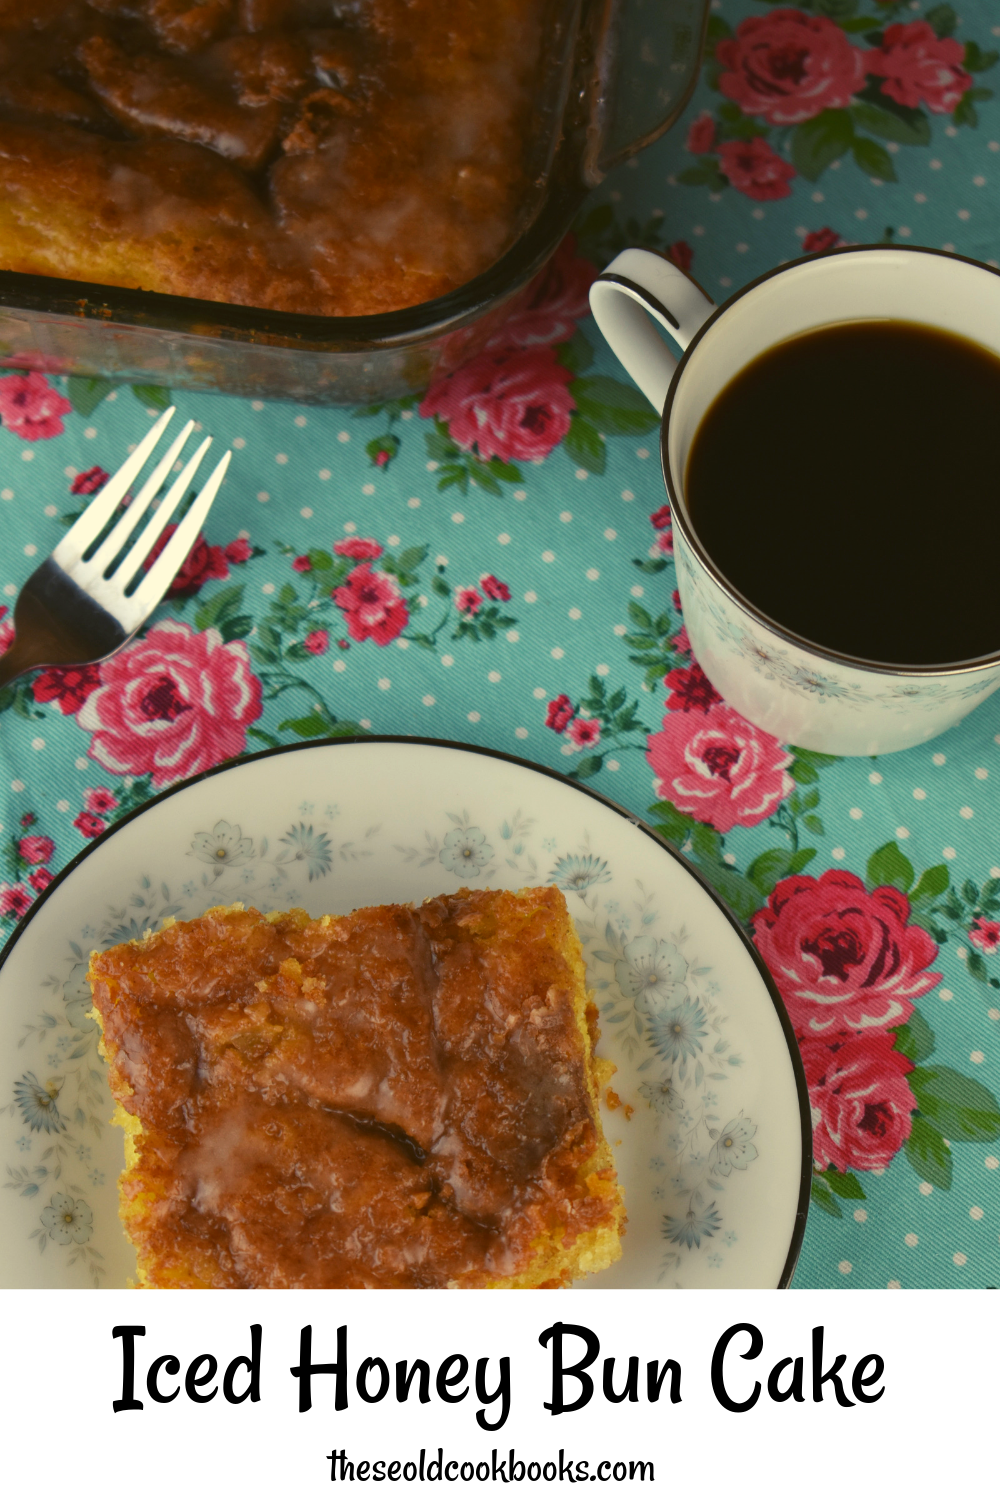 This Honey Bun Coffee Cake recipe takes a box of yellow cake mix and adds a couple extra ingredients to turn it into a delicious breakfast or dessert treat.